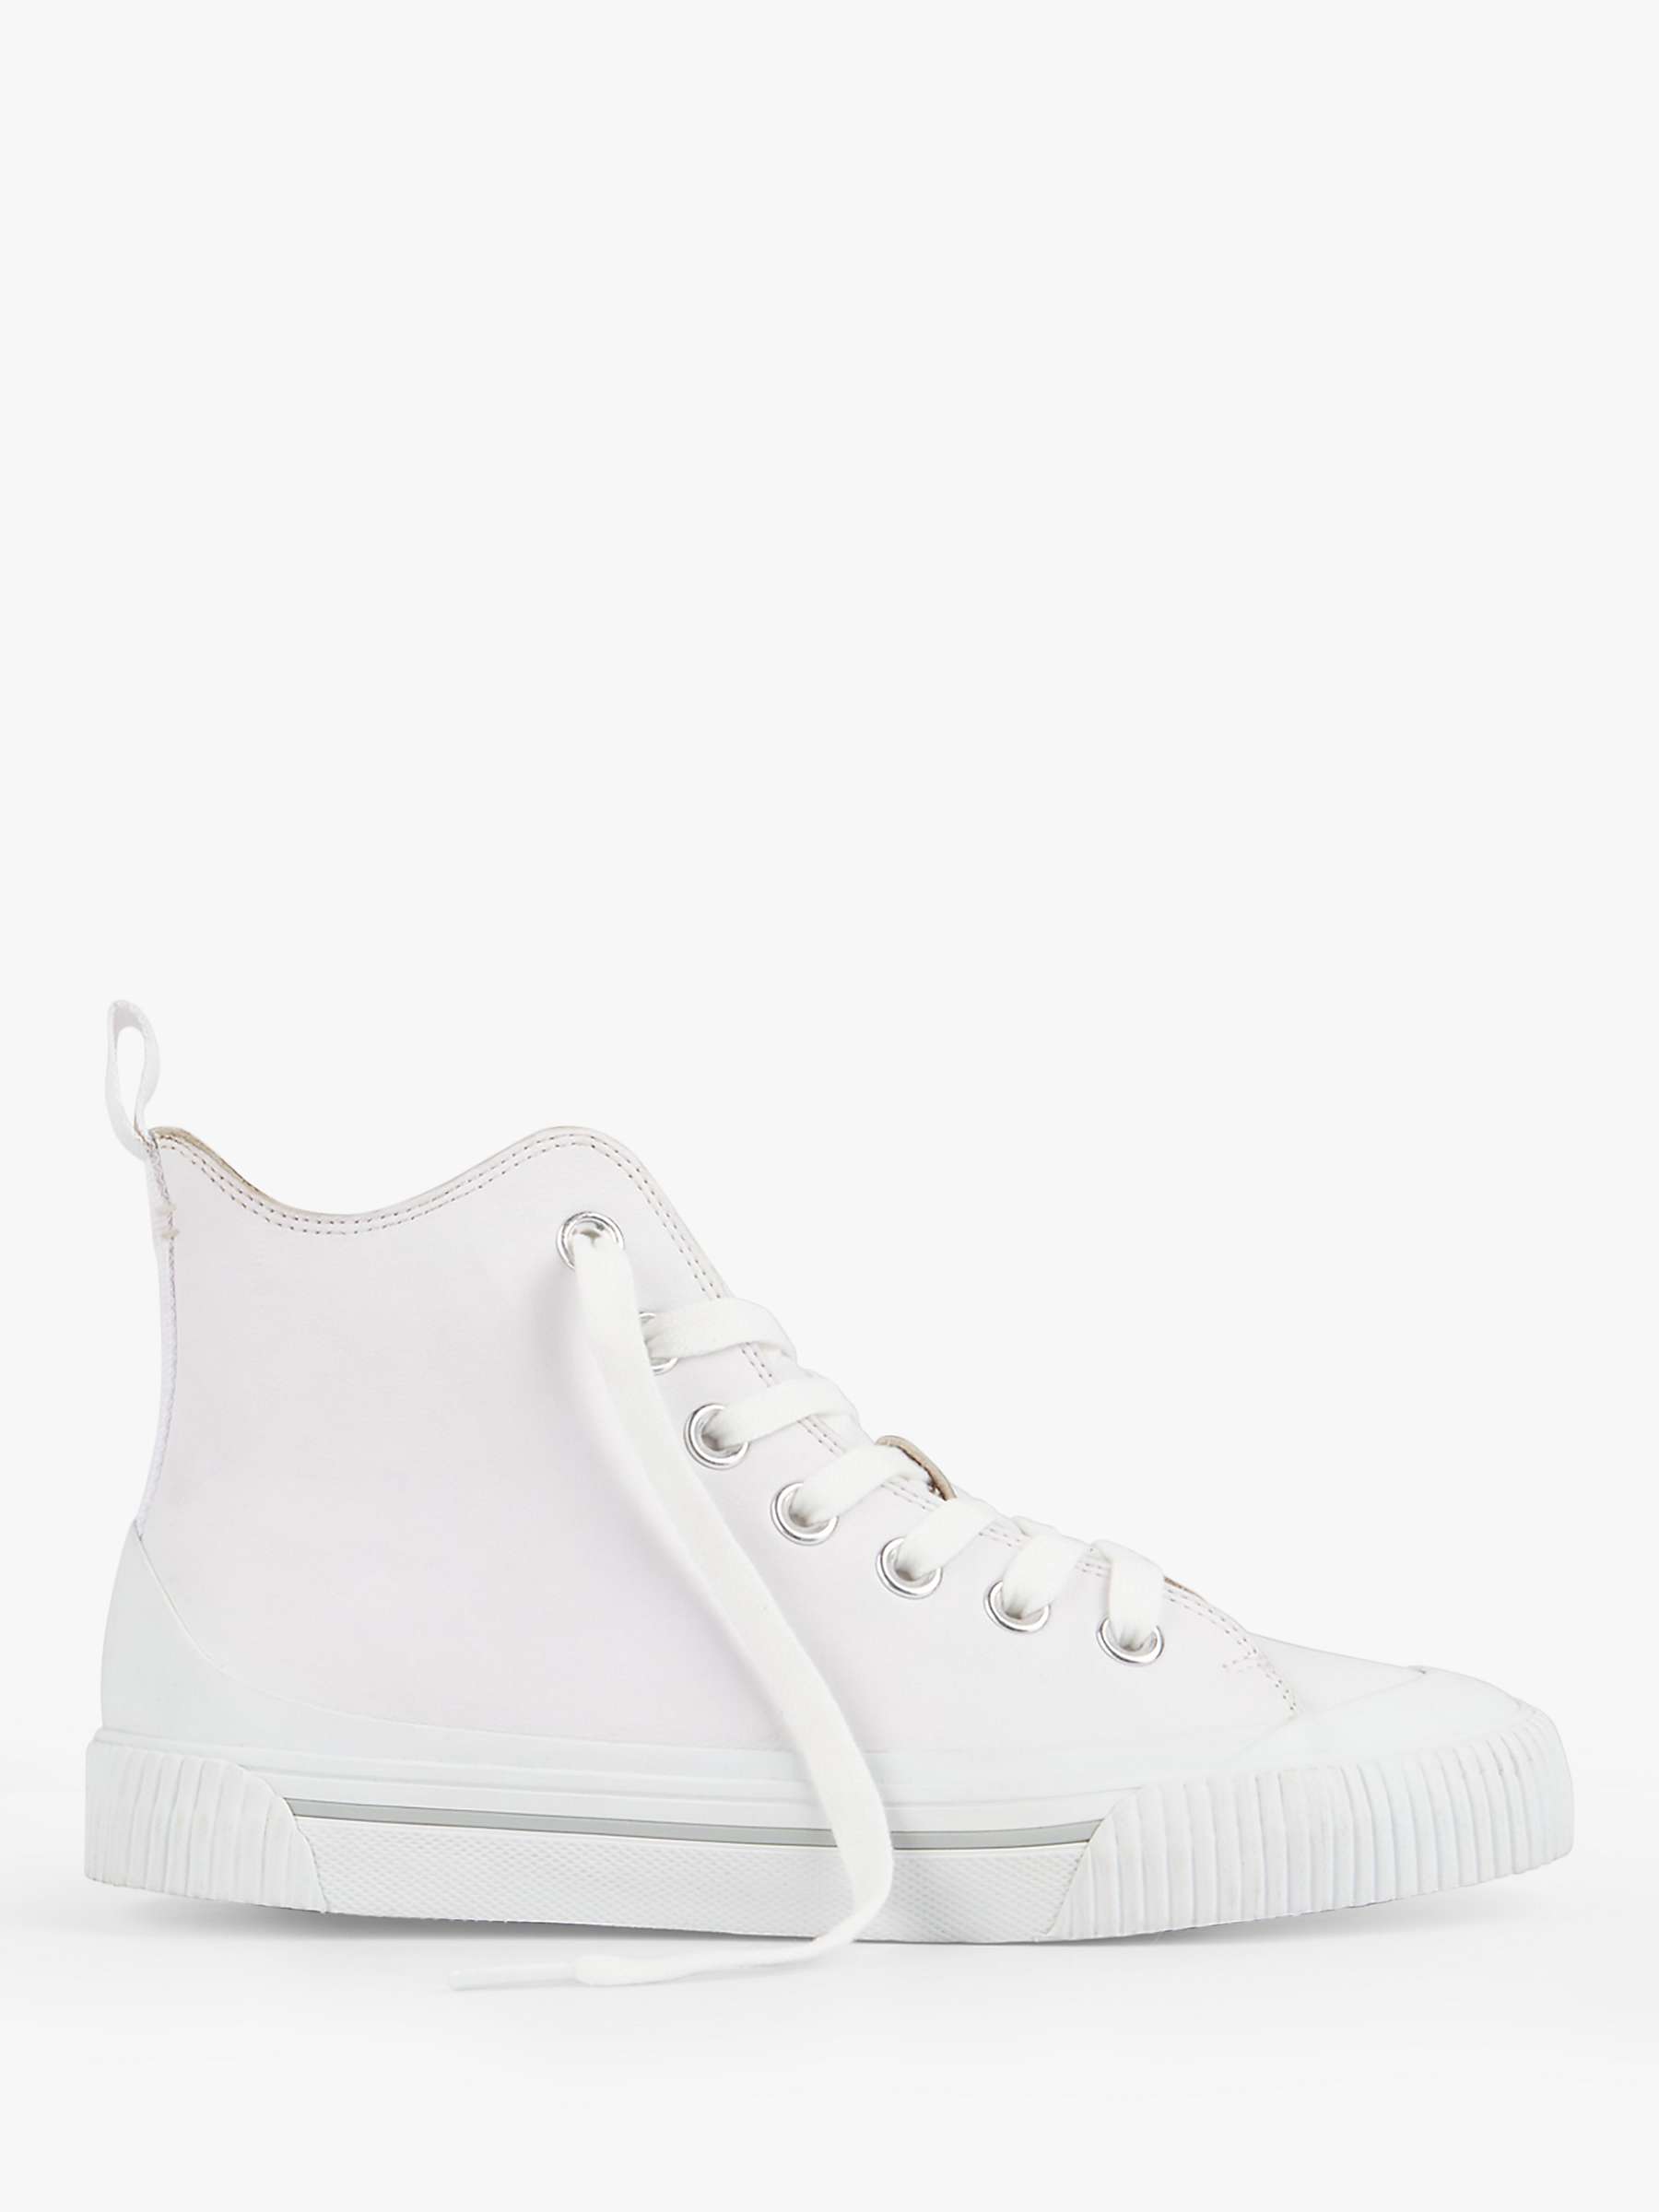 Buy hush Hadleigh High Top Trainers, White Online at johnlewis.com